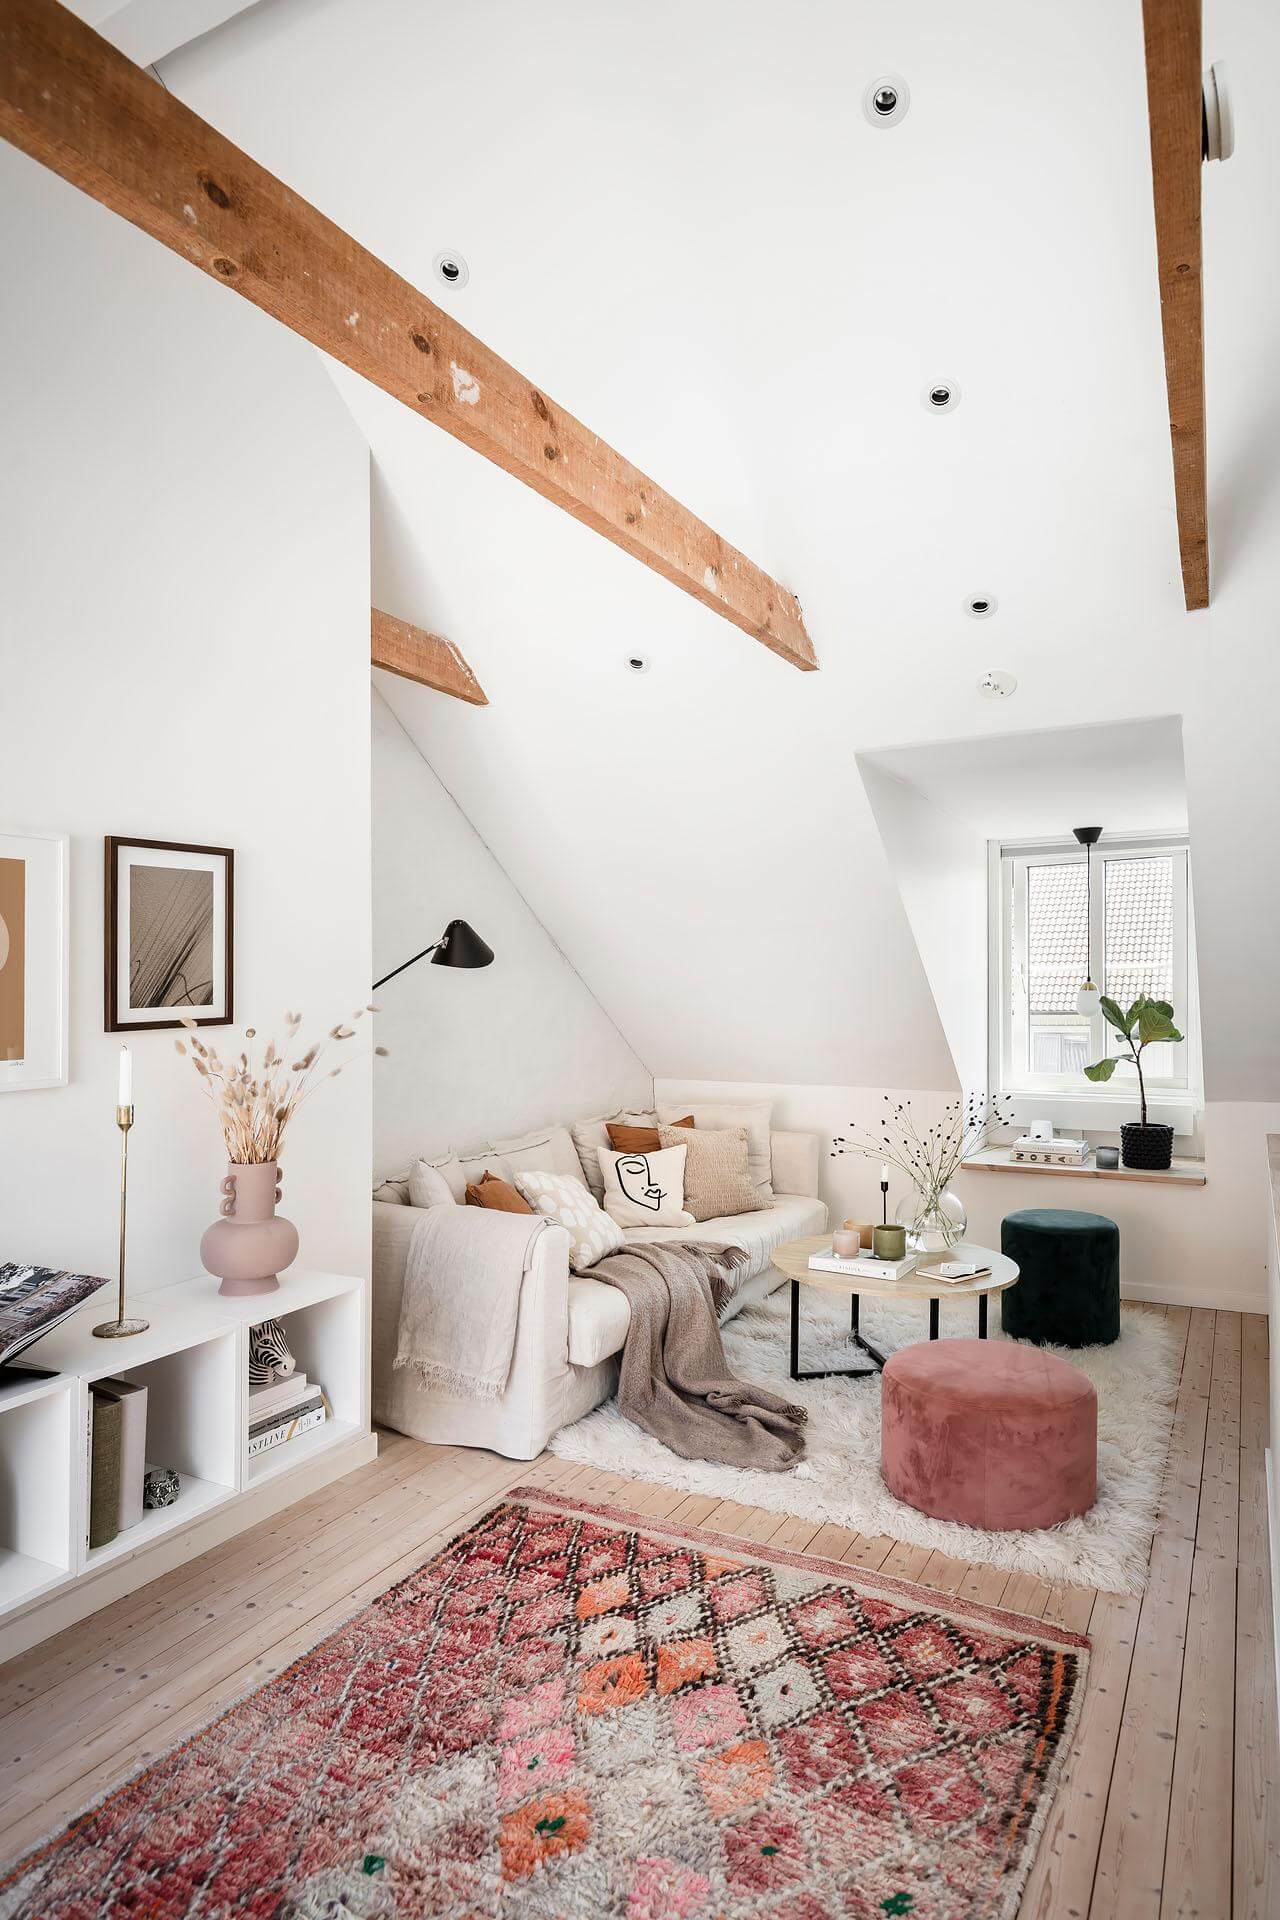 A Living Room with Pink Accents in a Light Attic Apartment